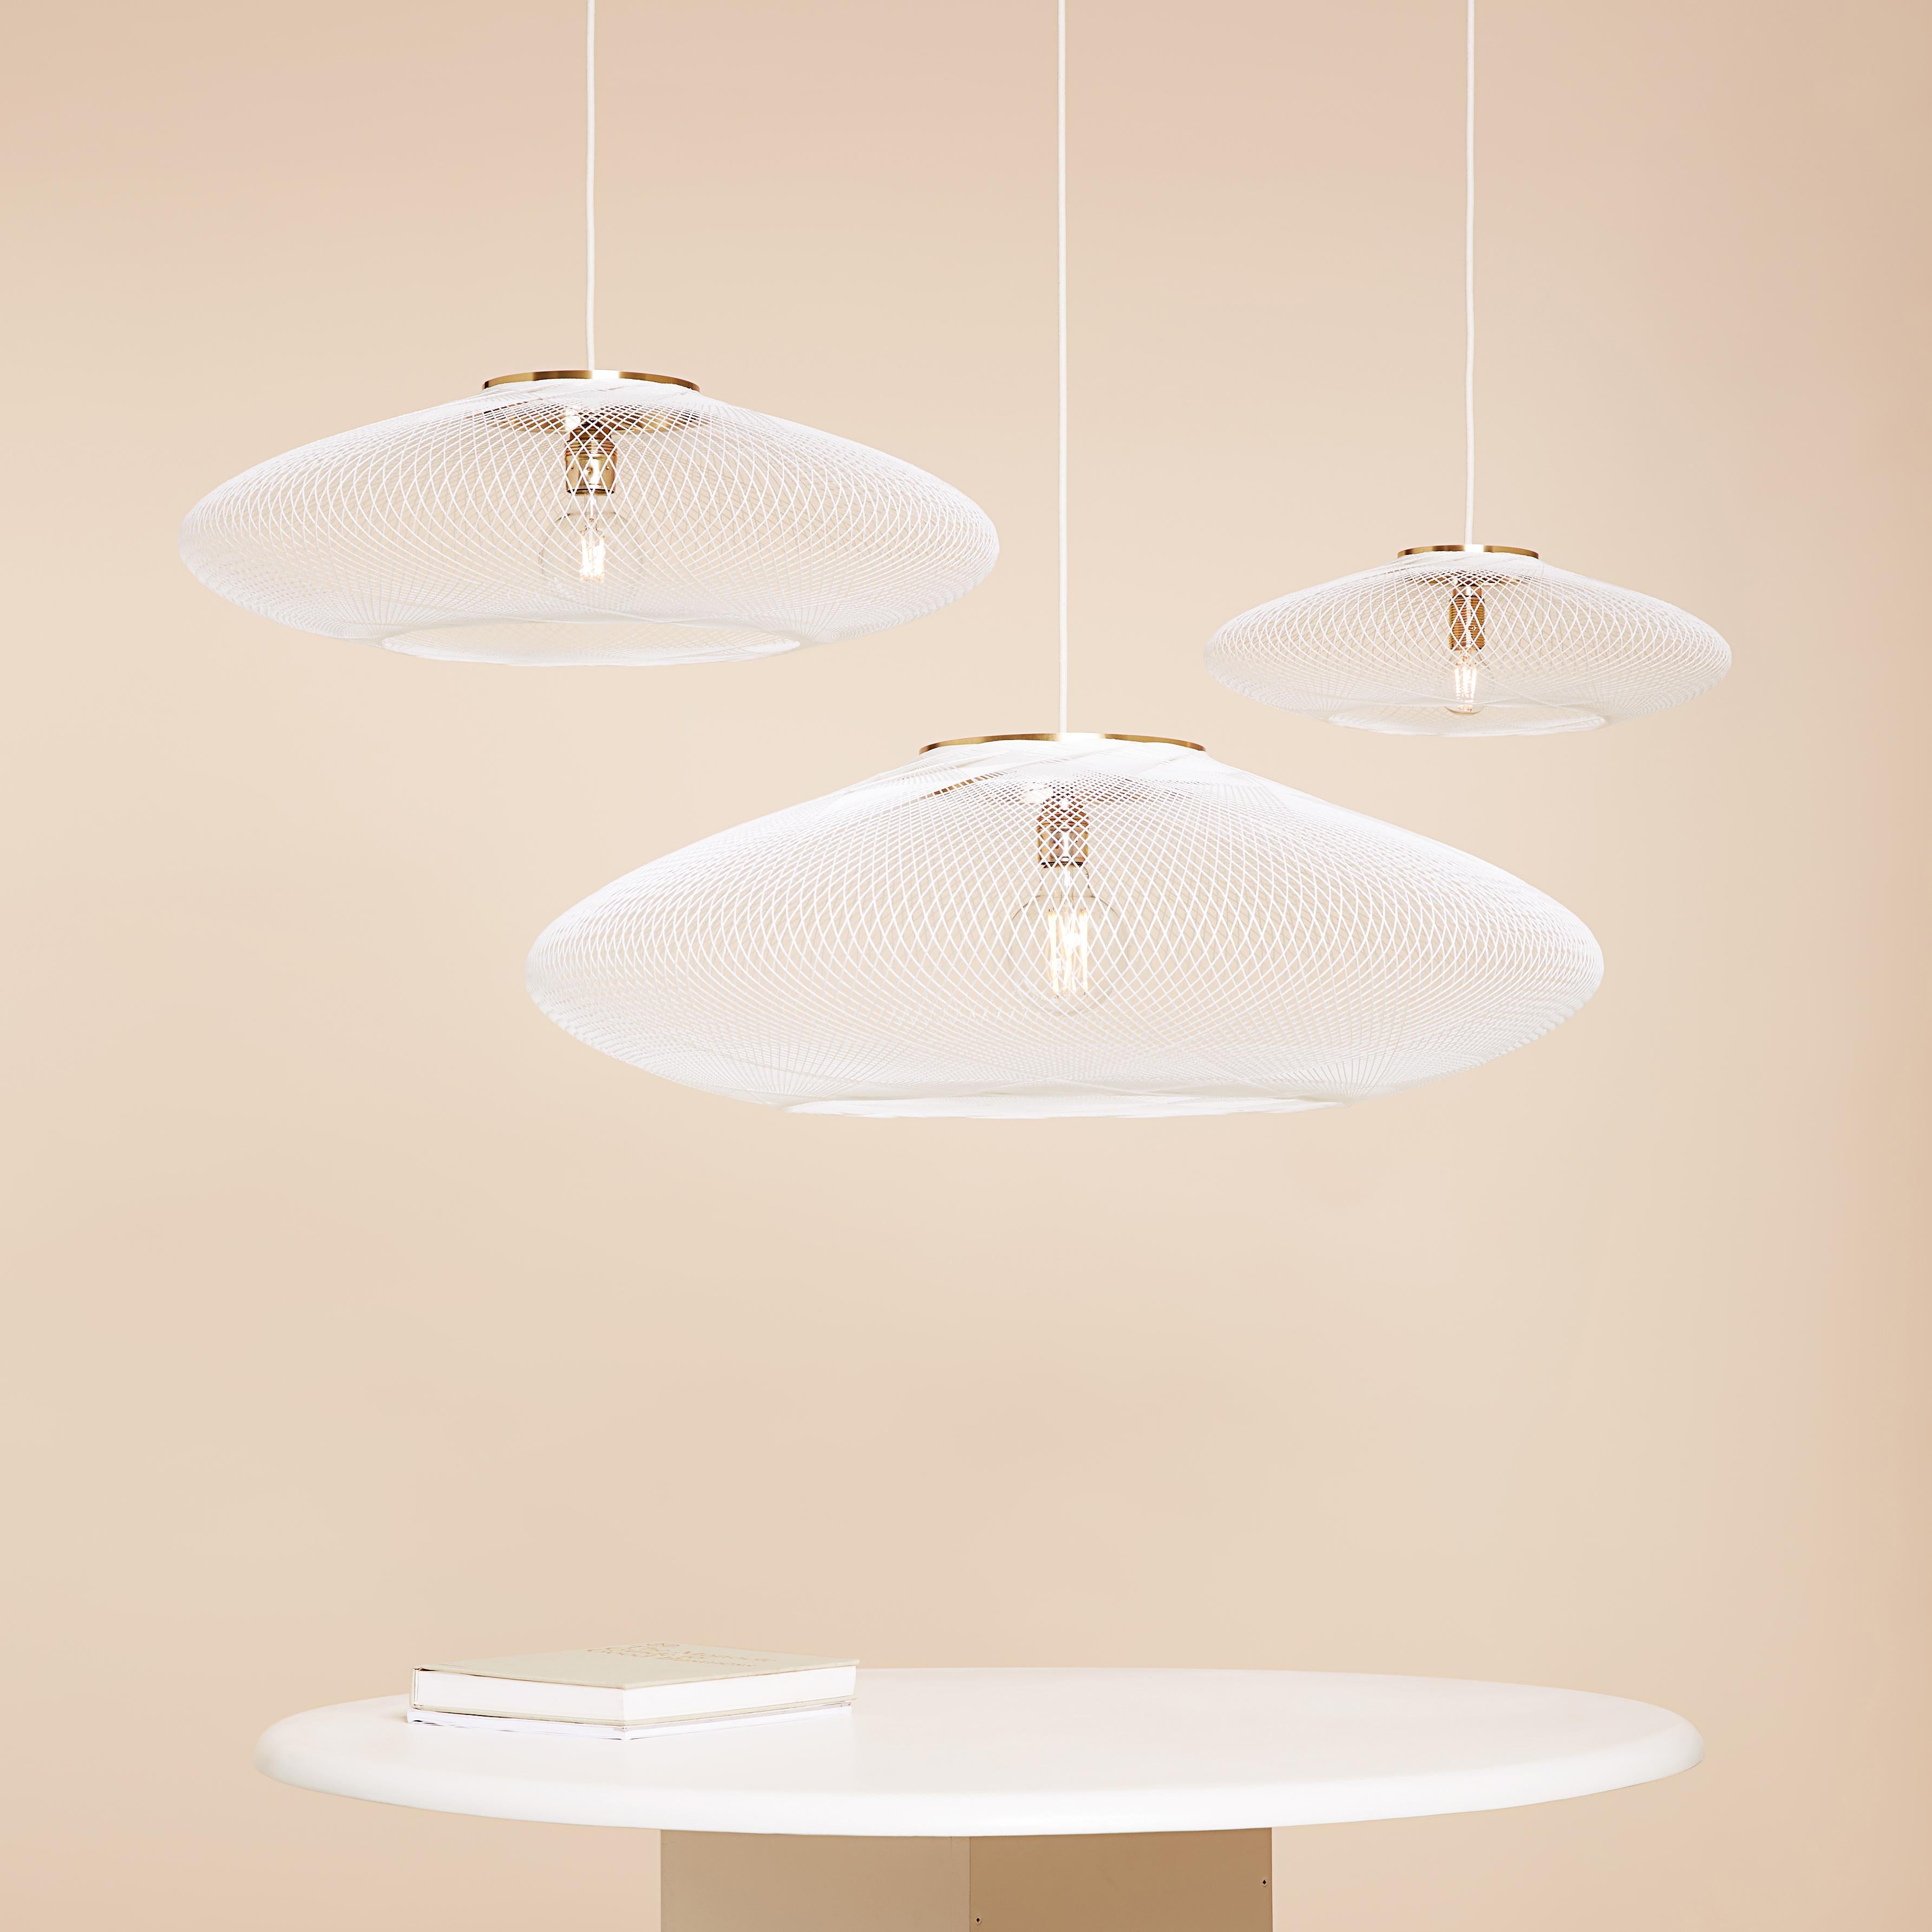 Small White UFO pendant lamp by Atelier Robotiq
Dimensions: D 40 x H 12 cm
Materials: Resin-impregnated industrial fiber, brass.
Available with holder in copper/ brass/ black coated stainless steel.
Available in different colors, 3 sizes, and in